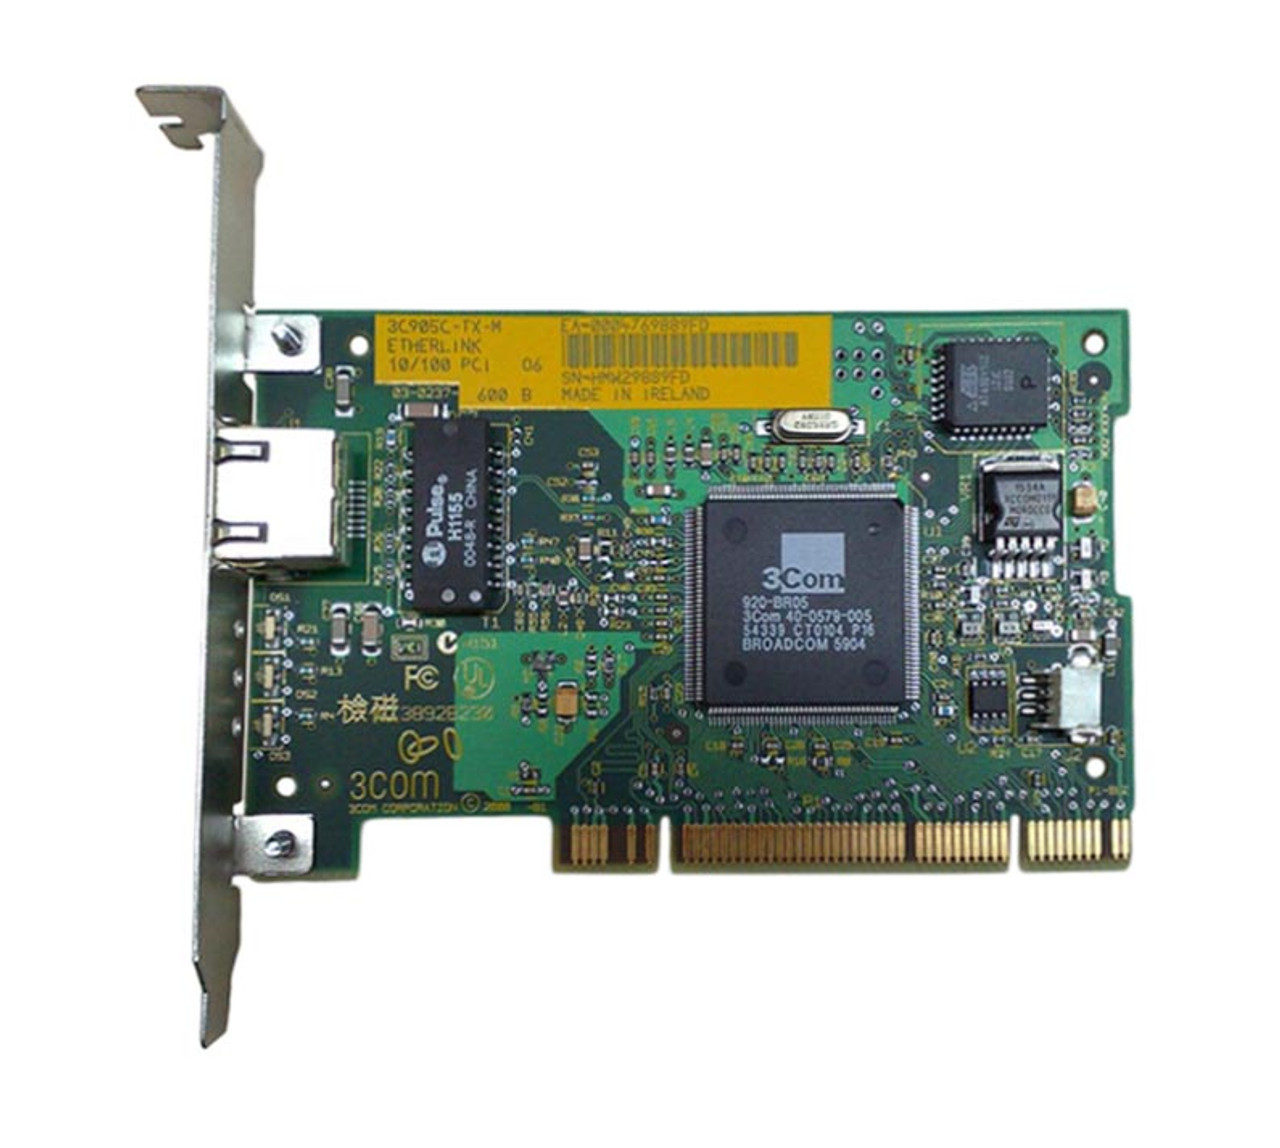 920-BR05 3Com EtherLink 10/100 PCI Network Interface Card